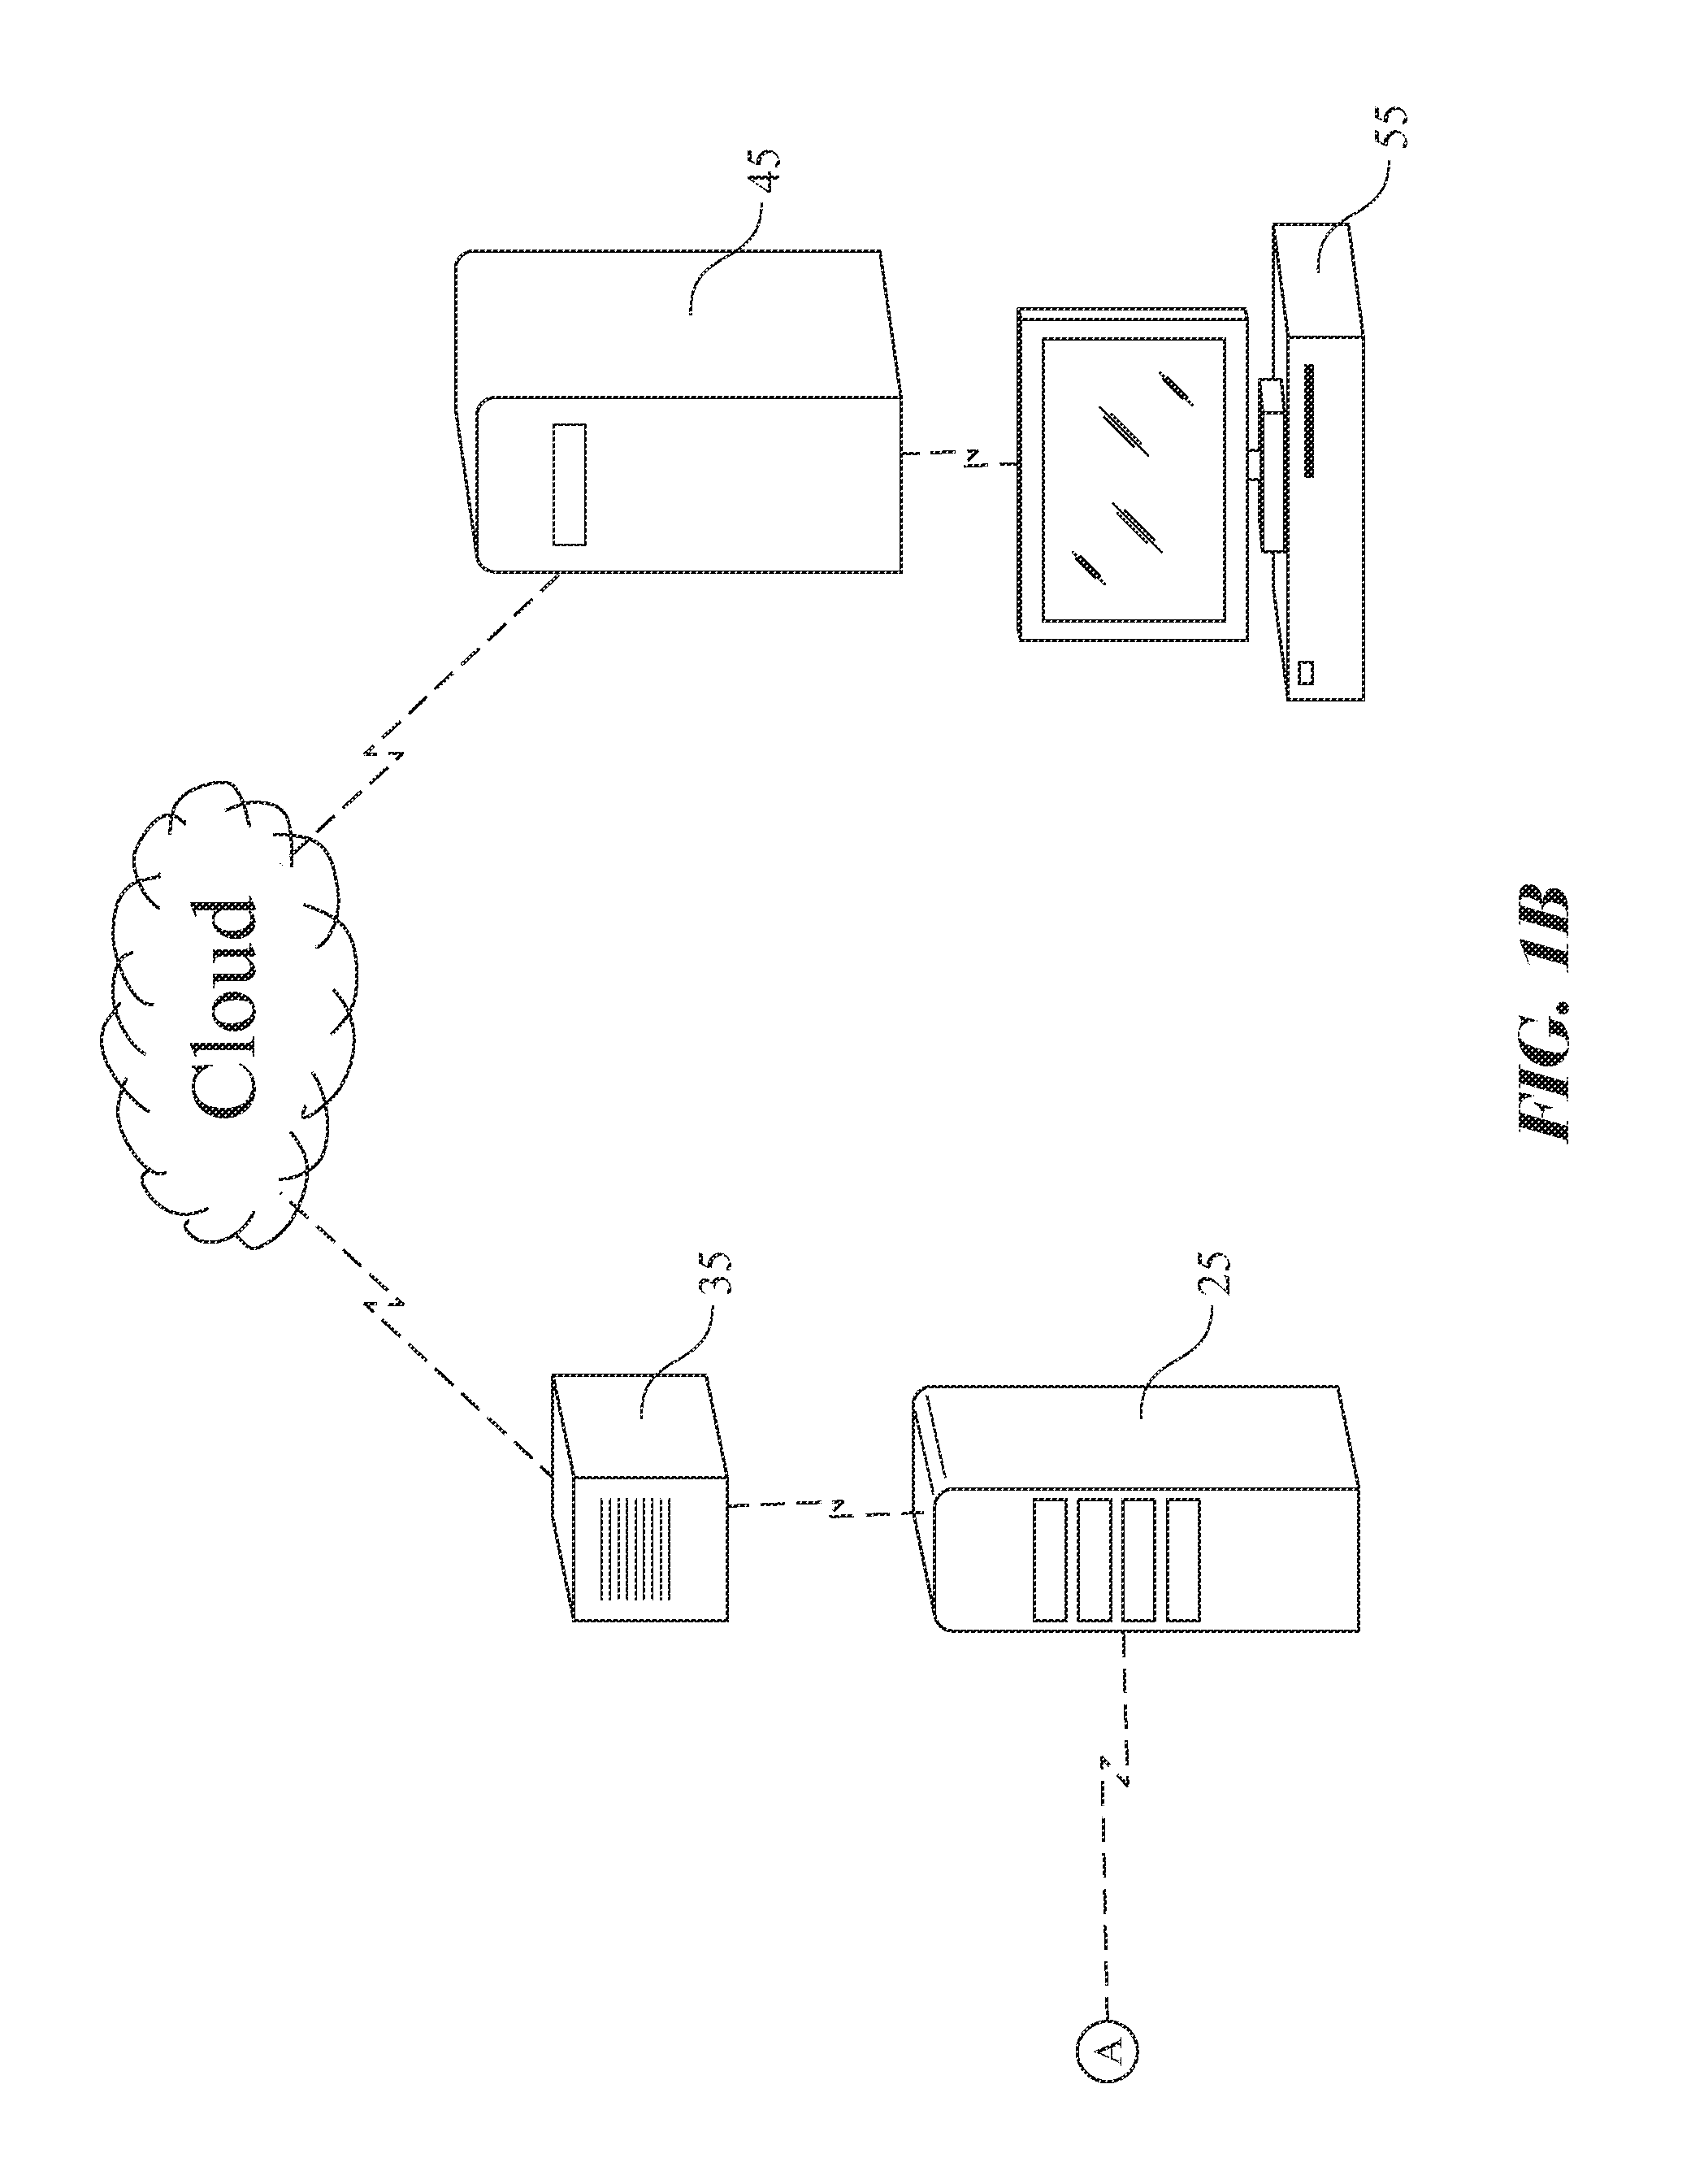 Method of operating a system for precisely locating an asset point in a physical plant